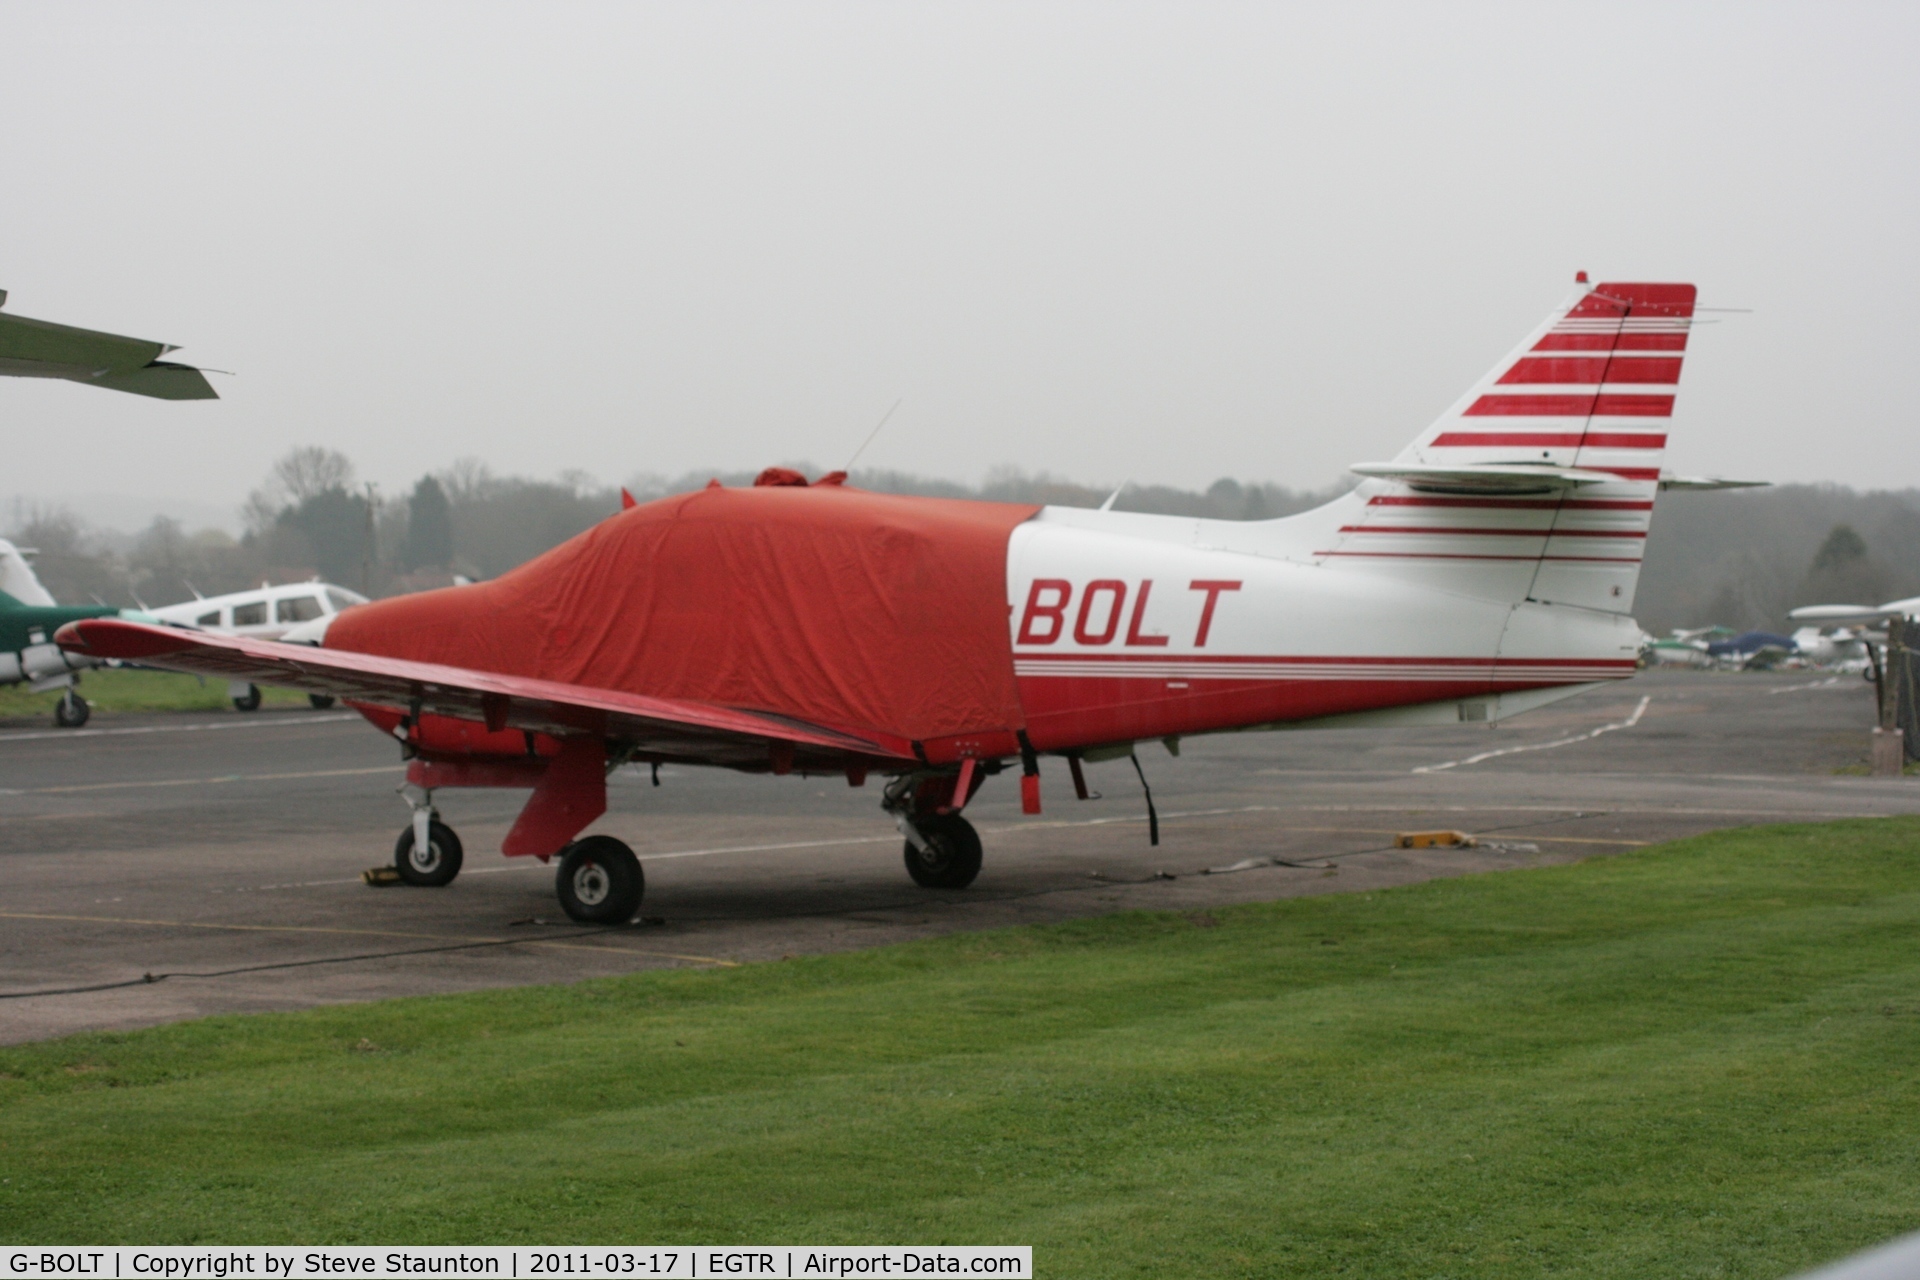 G-BOLT, 1978 Rockwell Commander 114 C/N 14428, Taken at Elstree Airfield March 2011